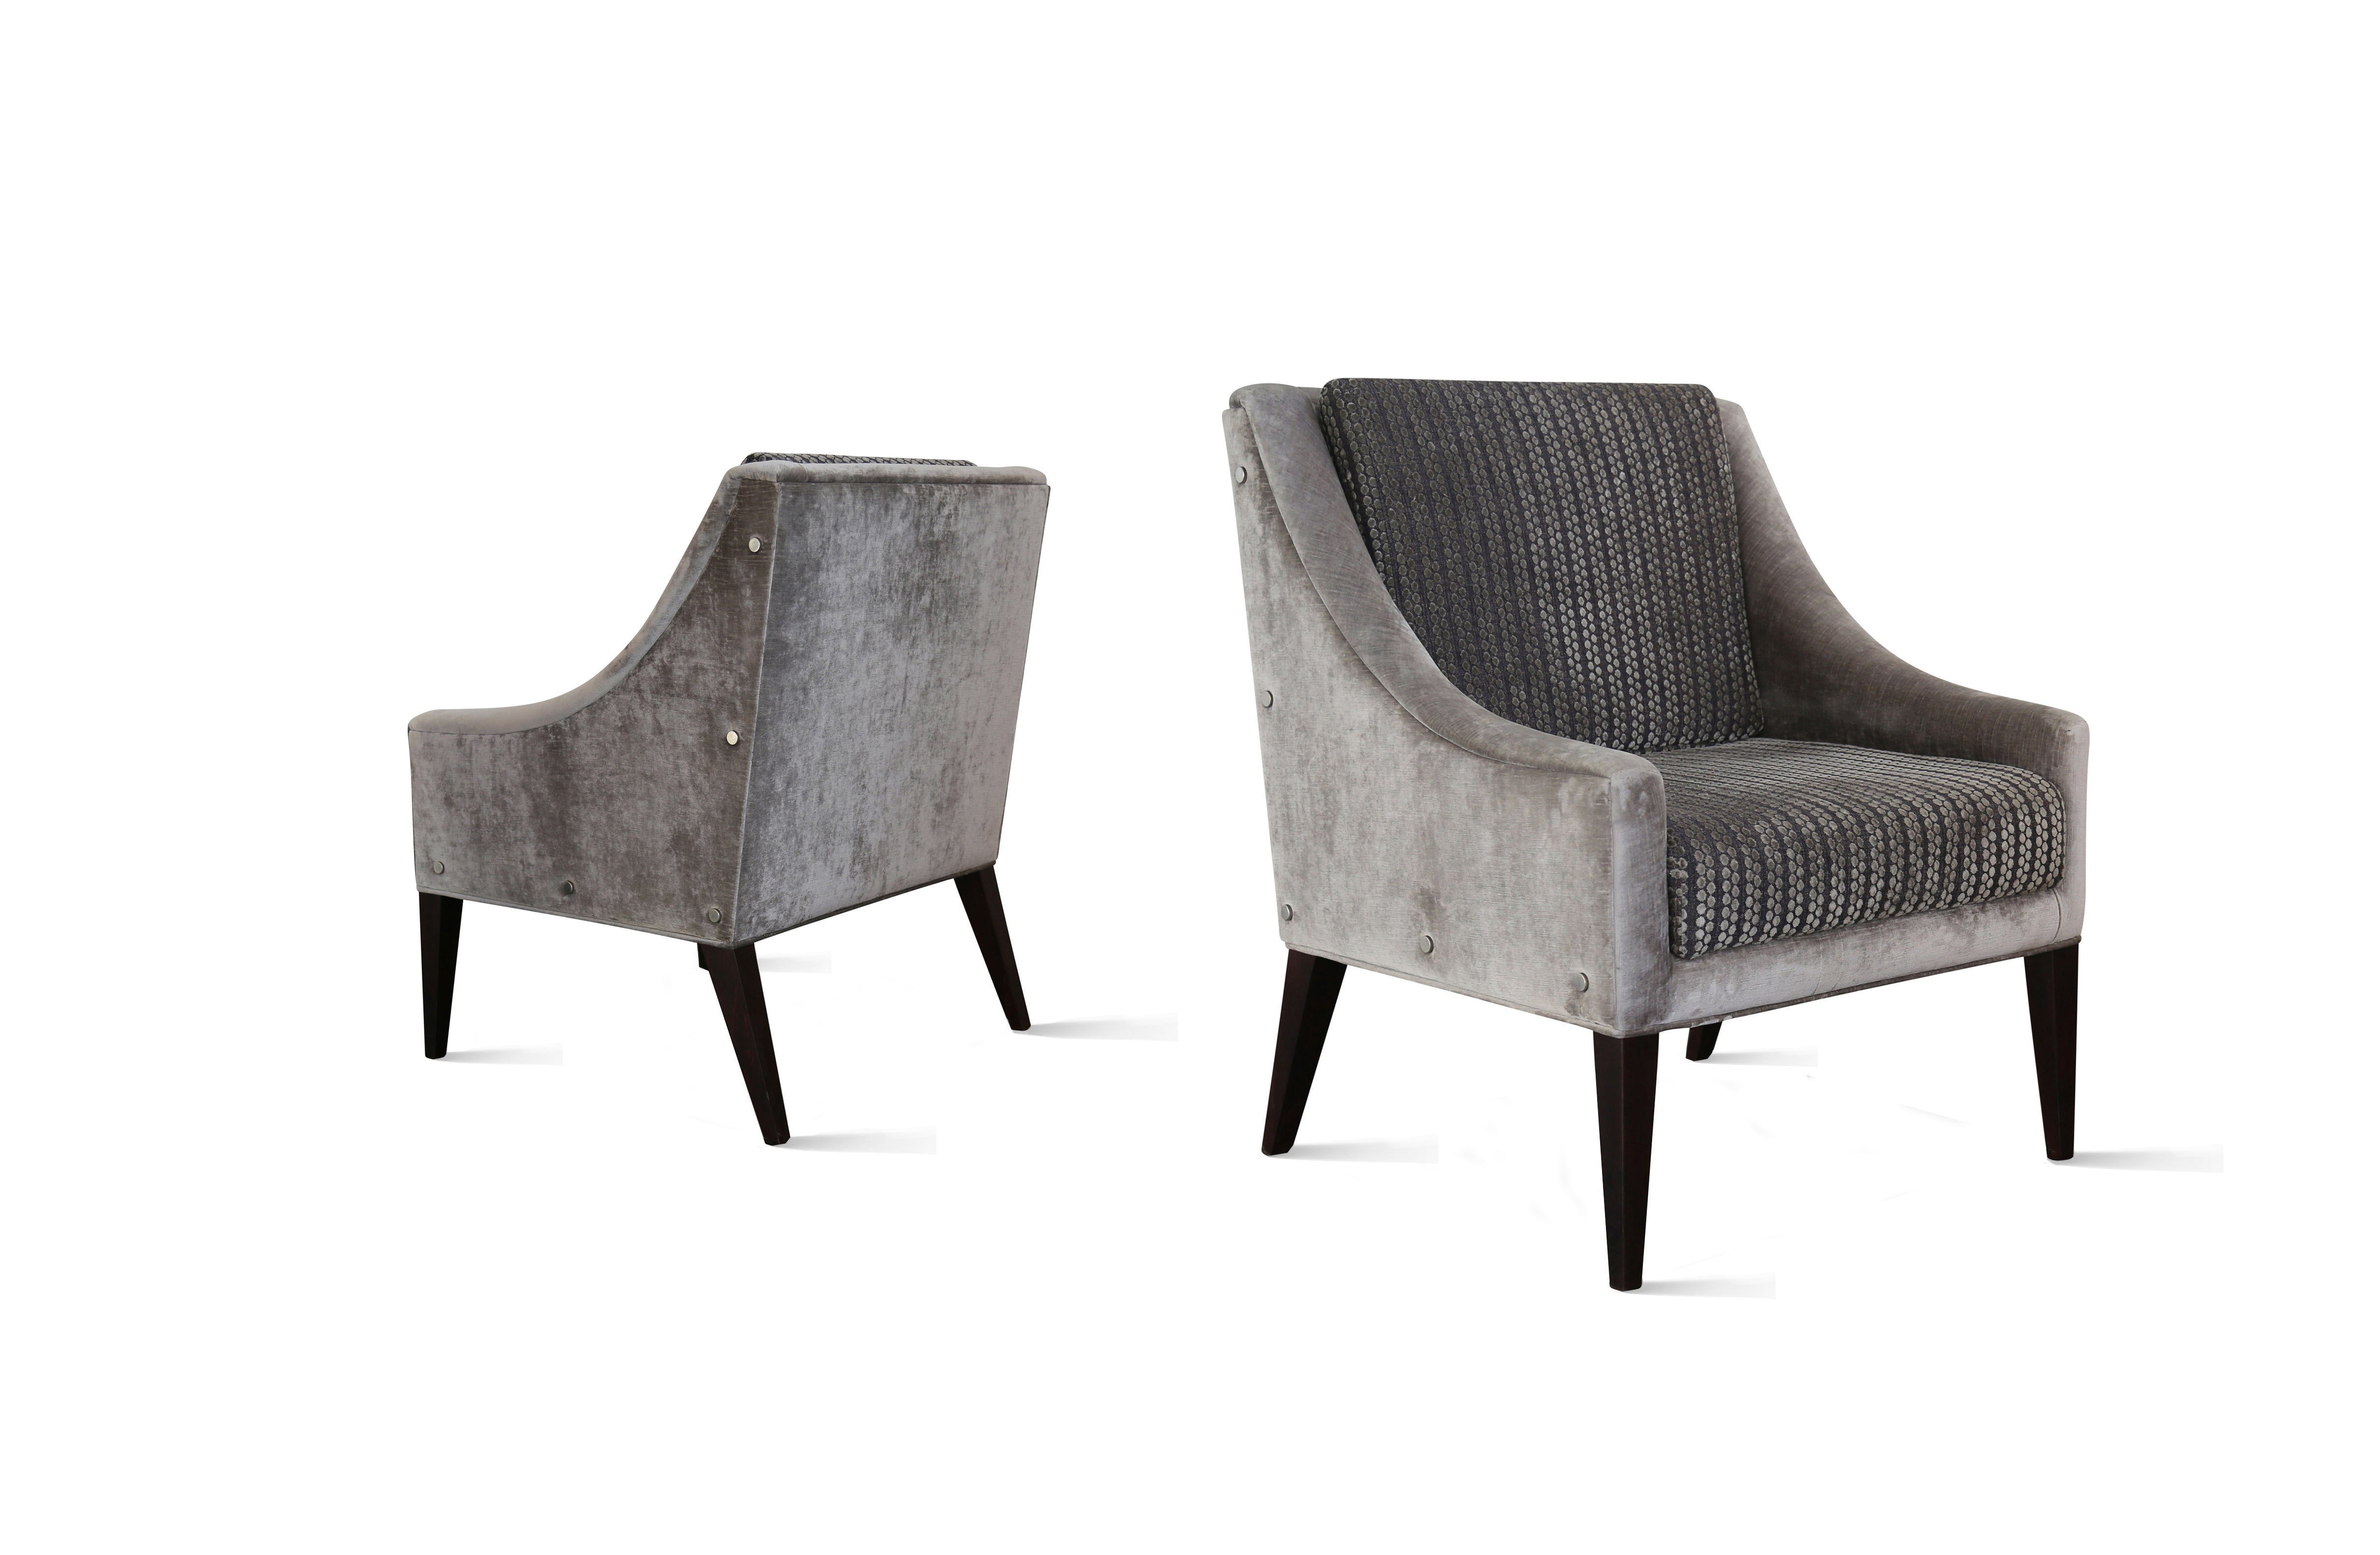 Modern Upholstered Lounge Armchair from Costantini, in COM/COL, Lucina